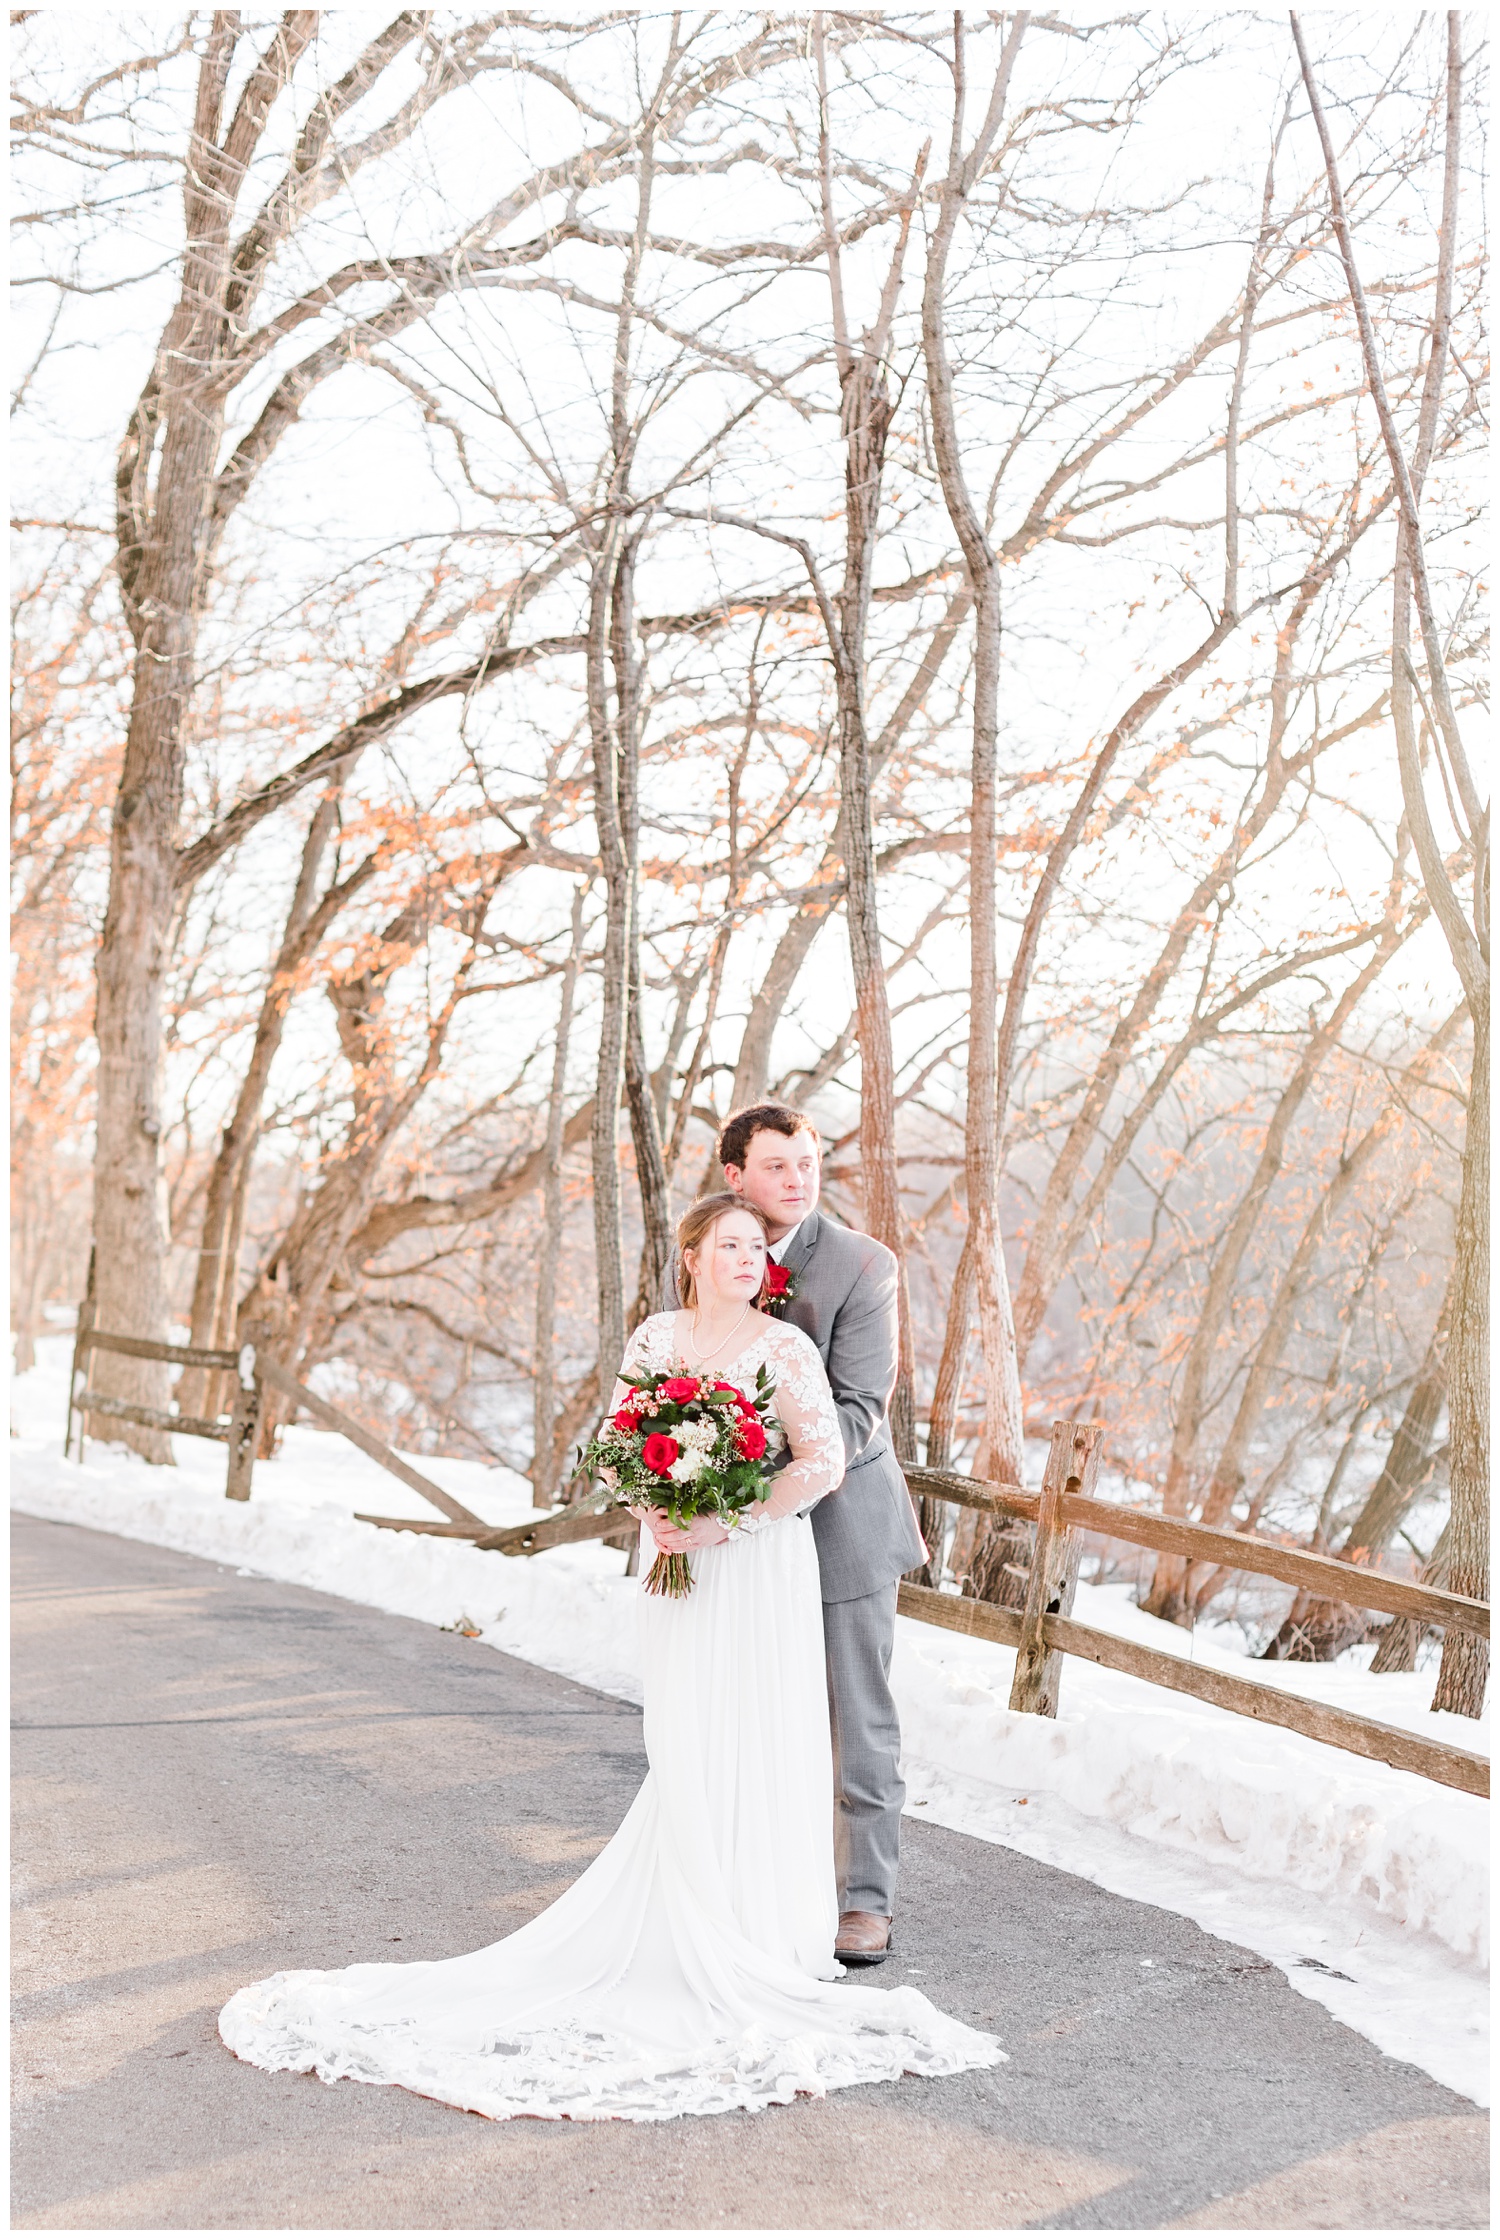 Bride and groom embrace on a snowy path at Reasoner Dam in Humboldt, IA | CB Studio